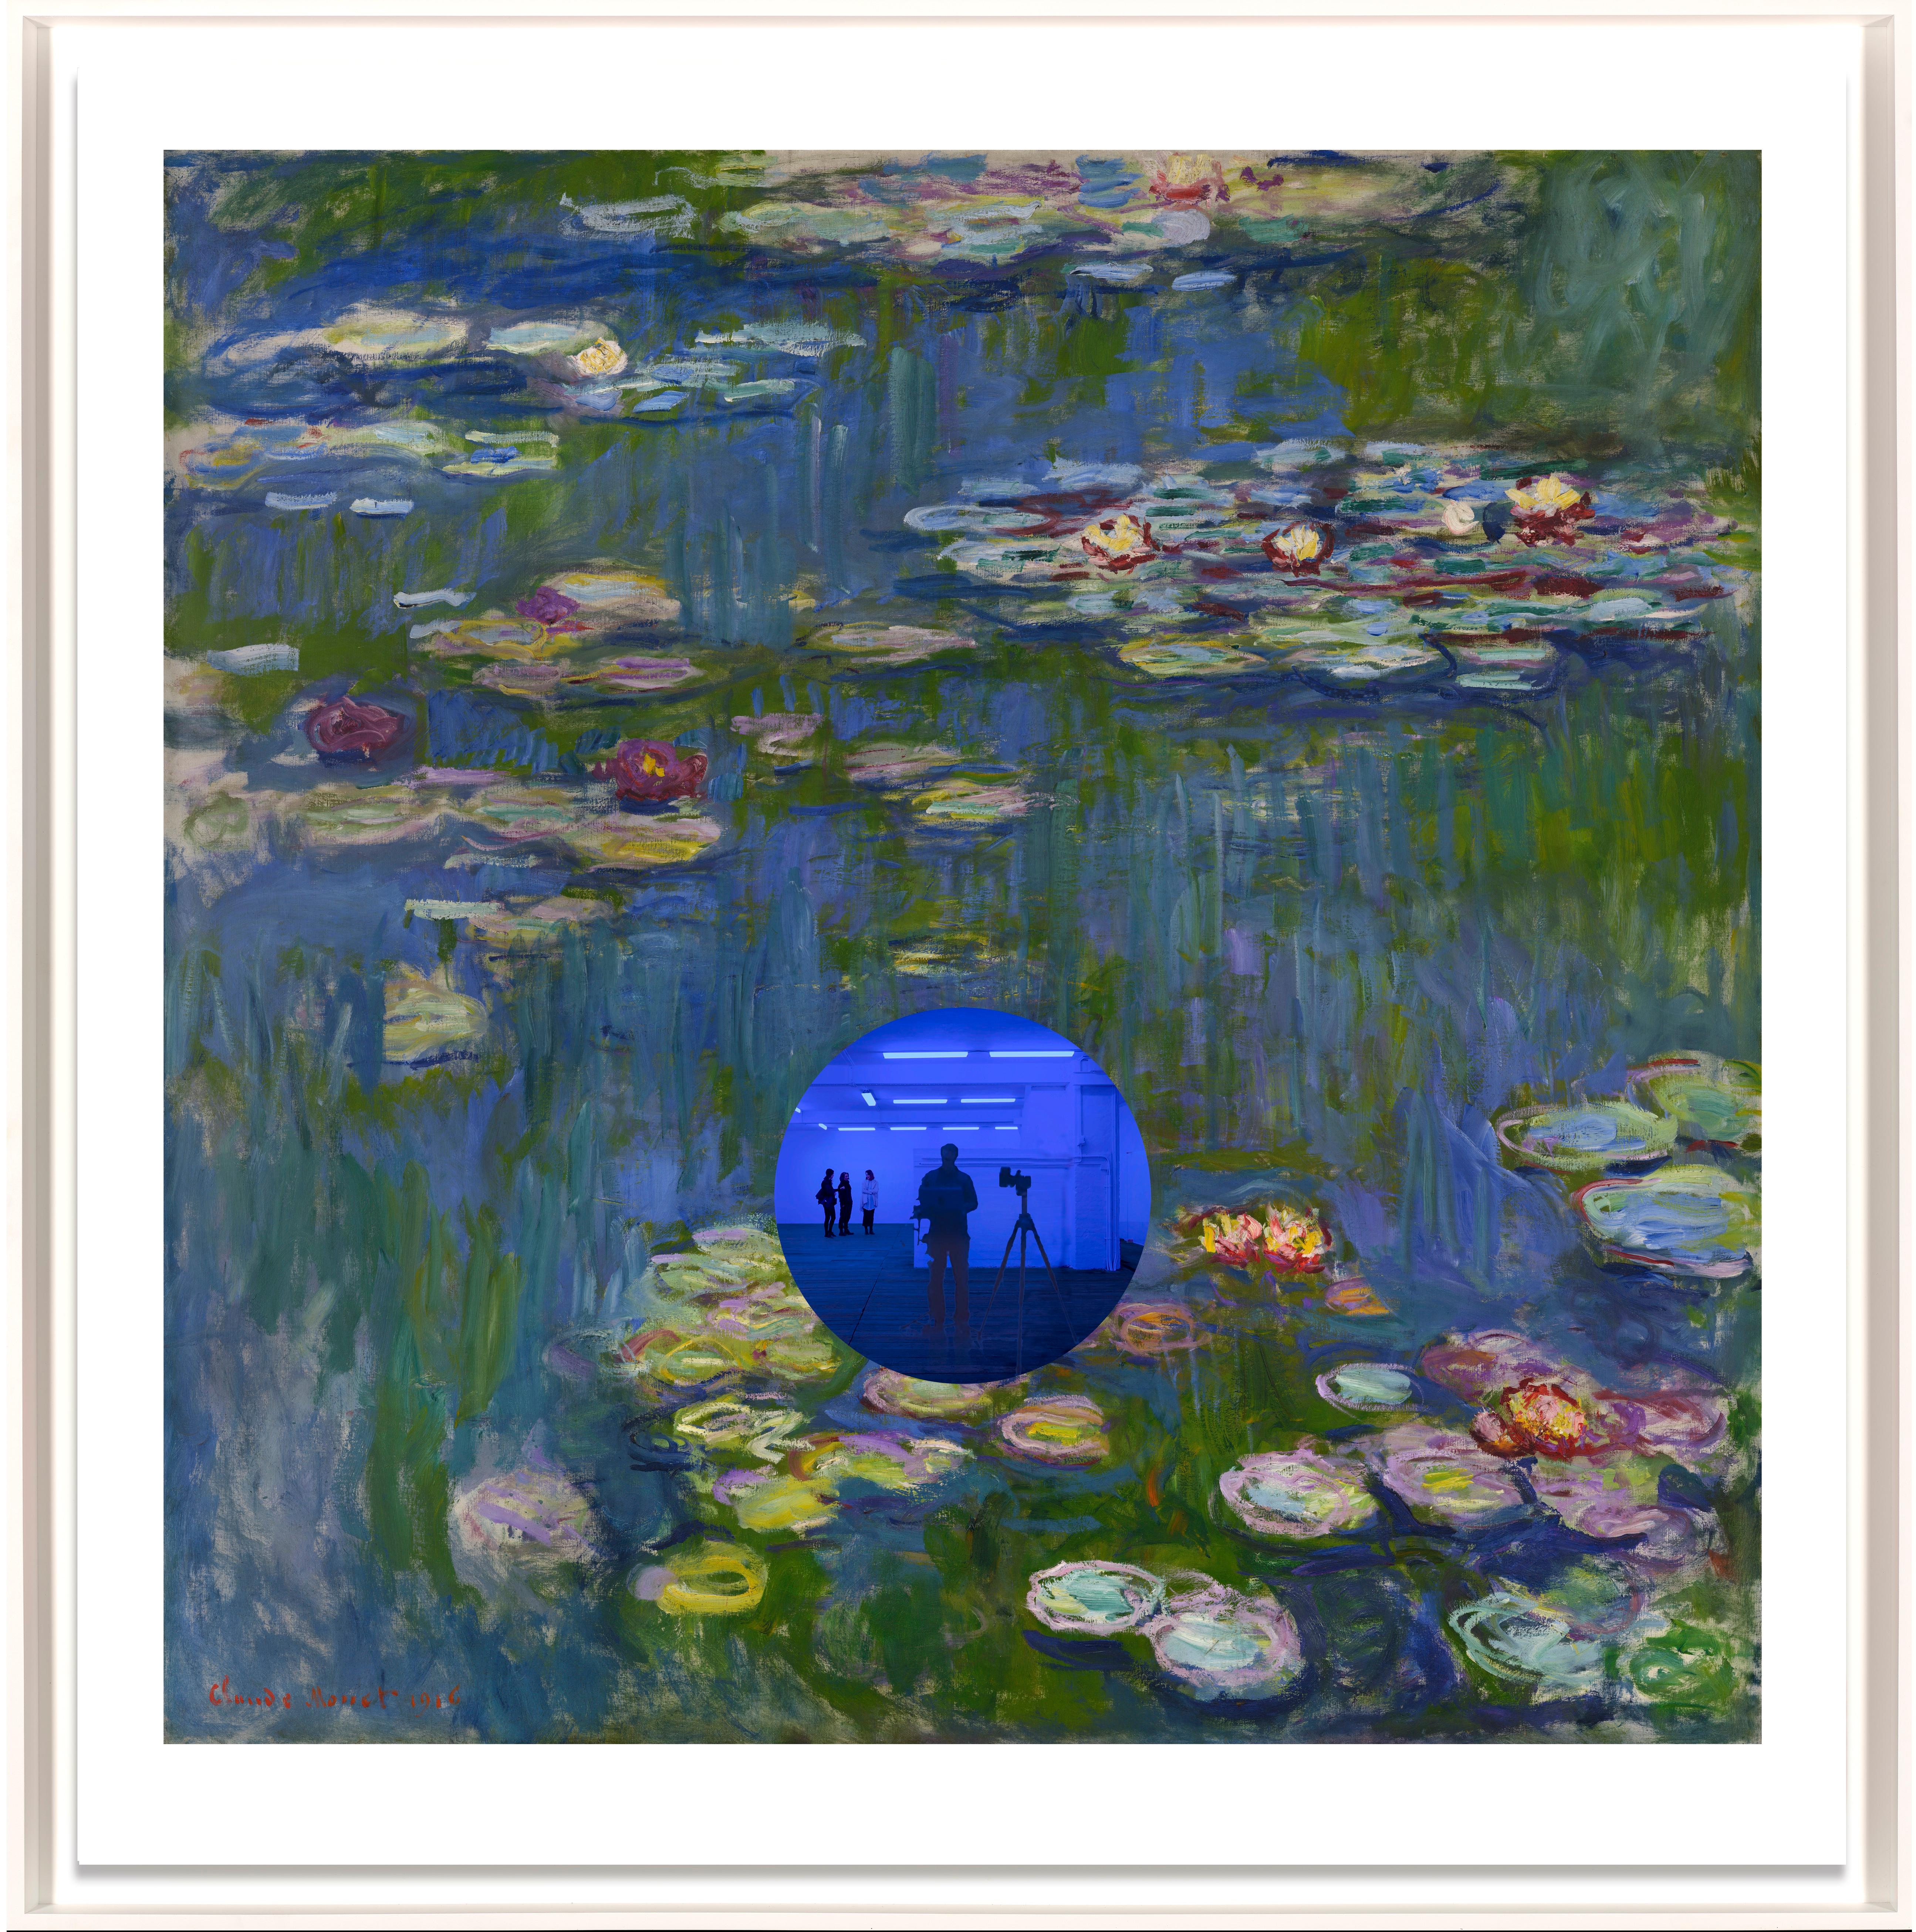 Jeff Koons
Gazing Ball (Monet Water Lilies), 2018
Archival pigment print on Innova rag paper, glass
38 3/5 × 37 4/5 in  98 × 96 cm
Edition of 20, 5 AP 
Artist Frame

Comes with Certificate of Authenticity 
Signed and numbered by the artist